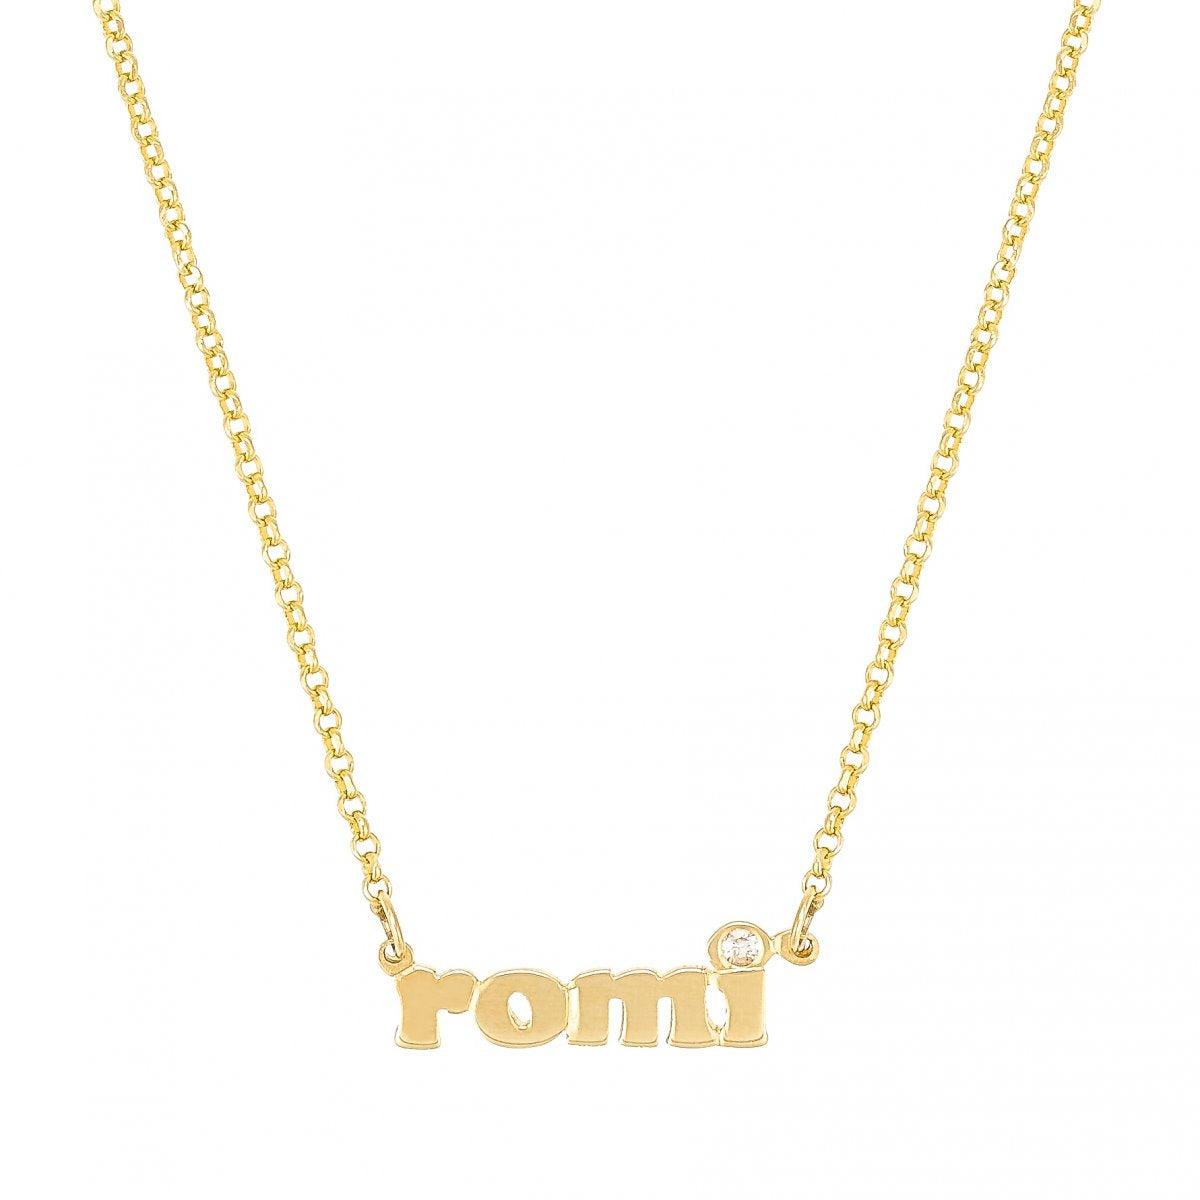 Mini Me With Diamond Accent - Custom Name Necklace In 14K Gold Or White Gold - Lola James Jewelry